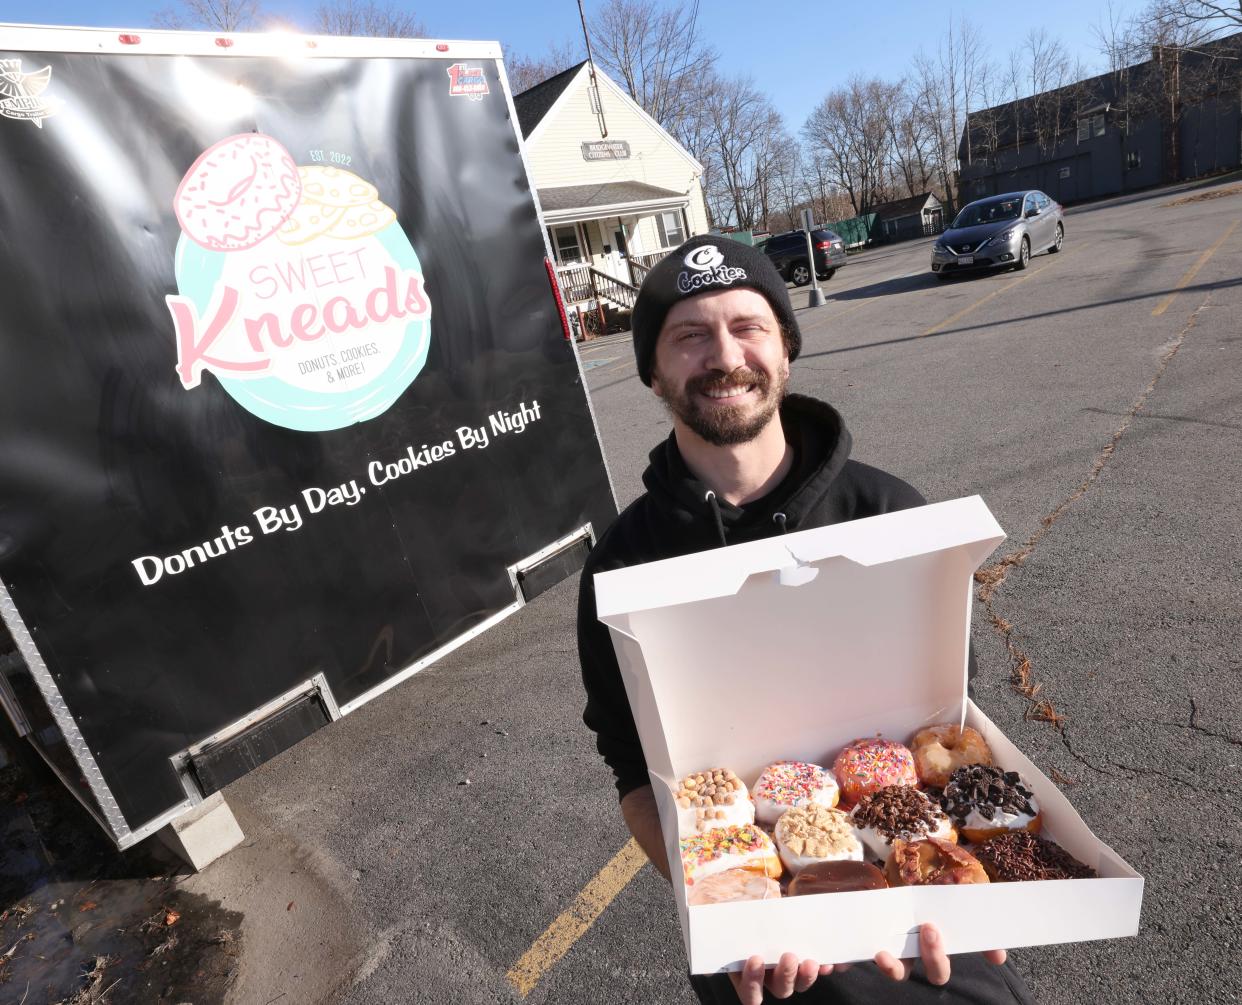 Grab a box of "Mommy I Love You" donuts for mom for Mother's Day at Sweet Kneads Bake Truck.